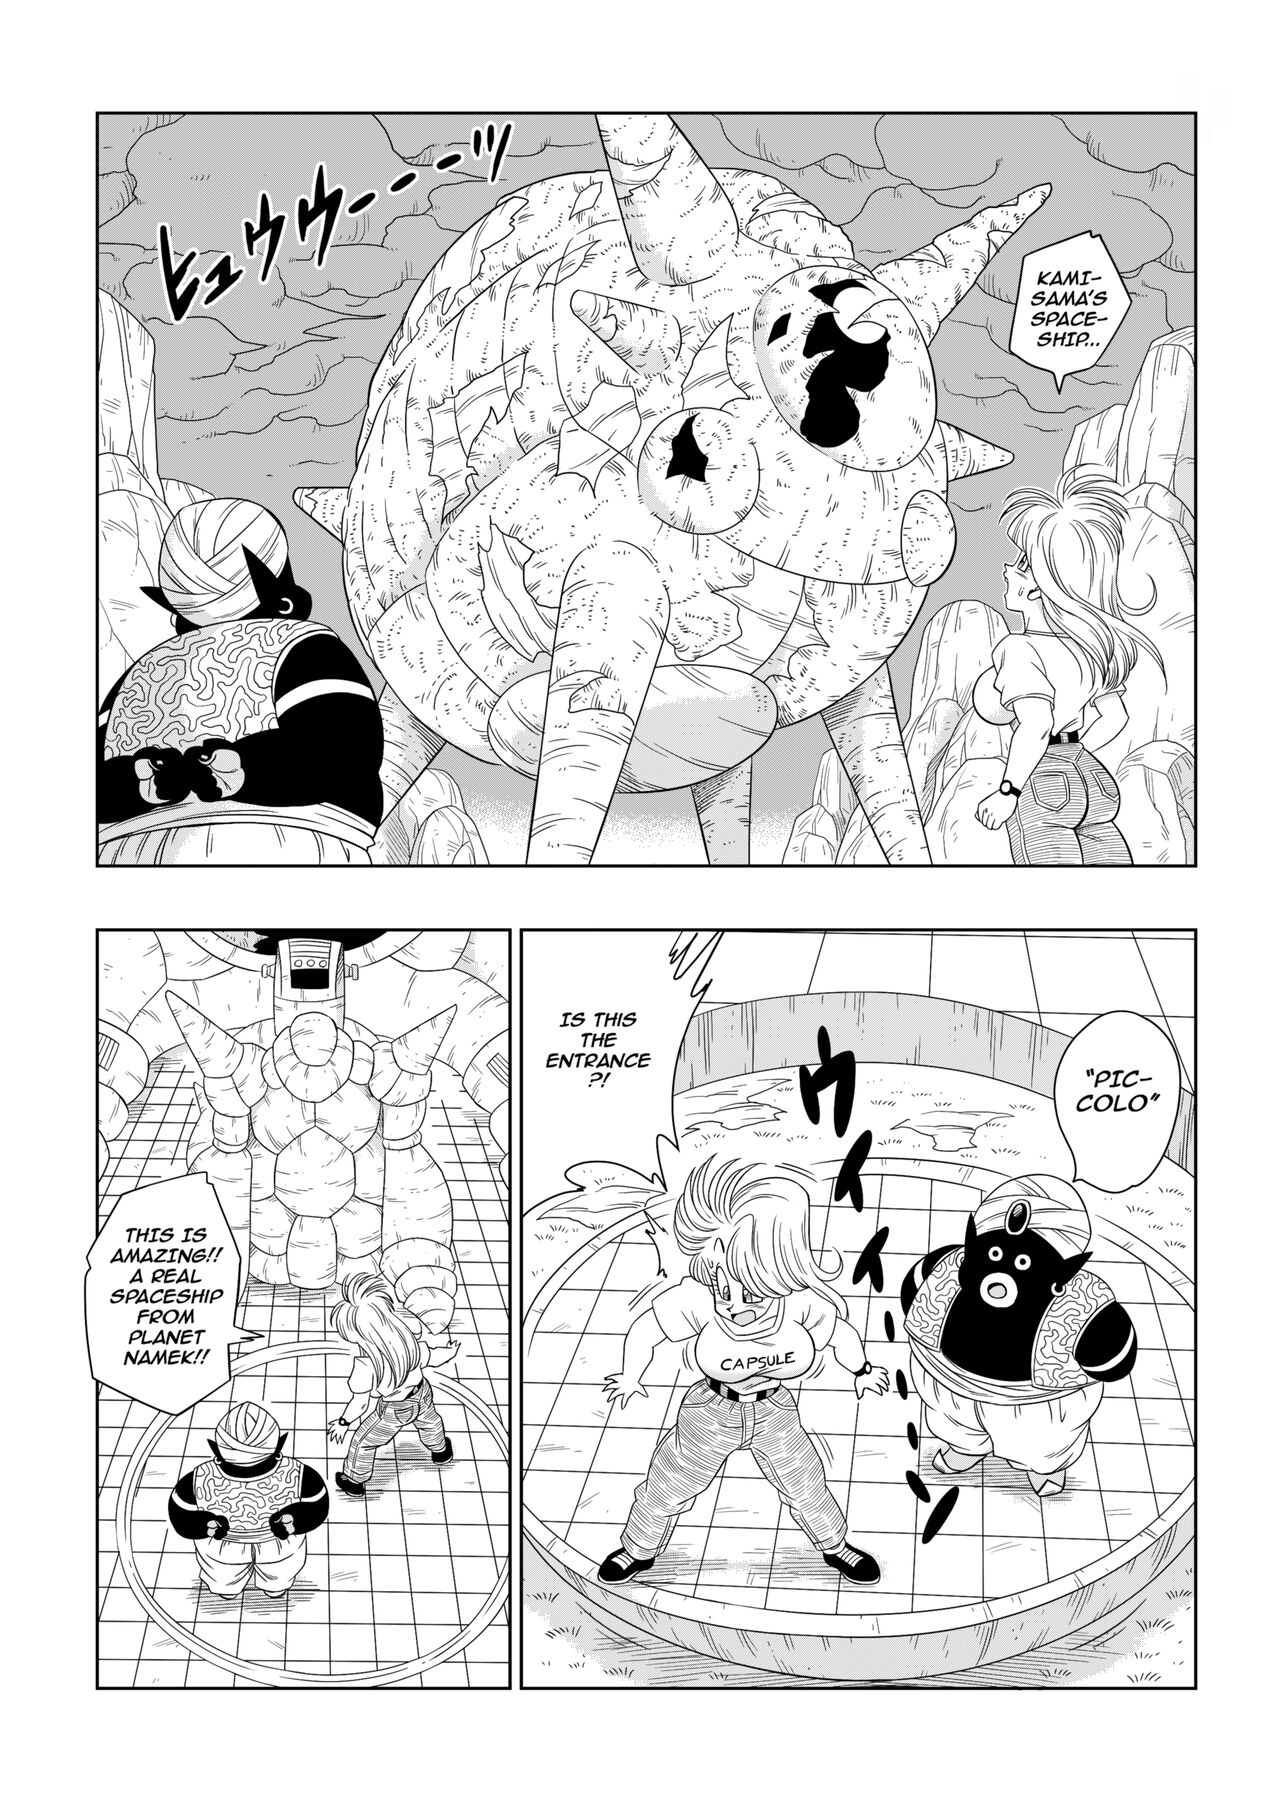 Bulma Meets Mr.Popo - Sex inside the Mysterious Spaceship! - Page 5 -  IMHentai